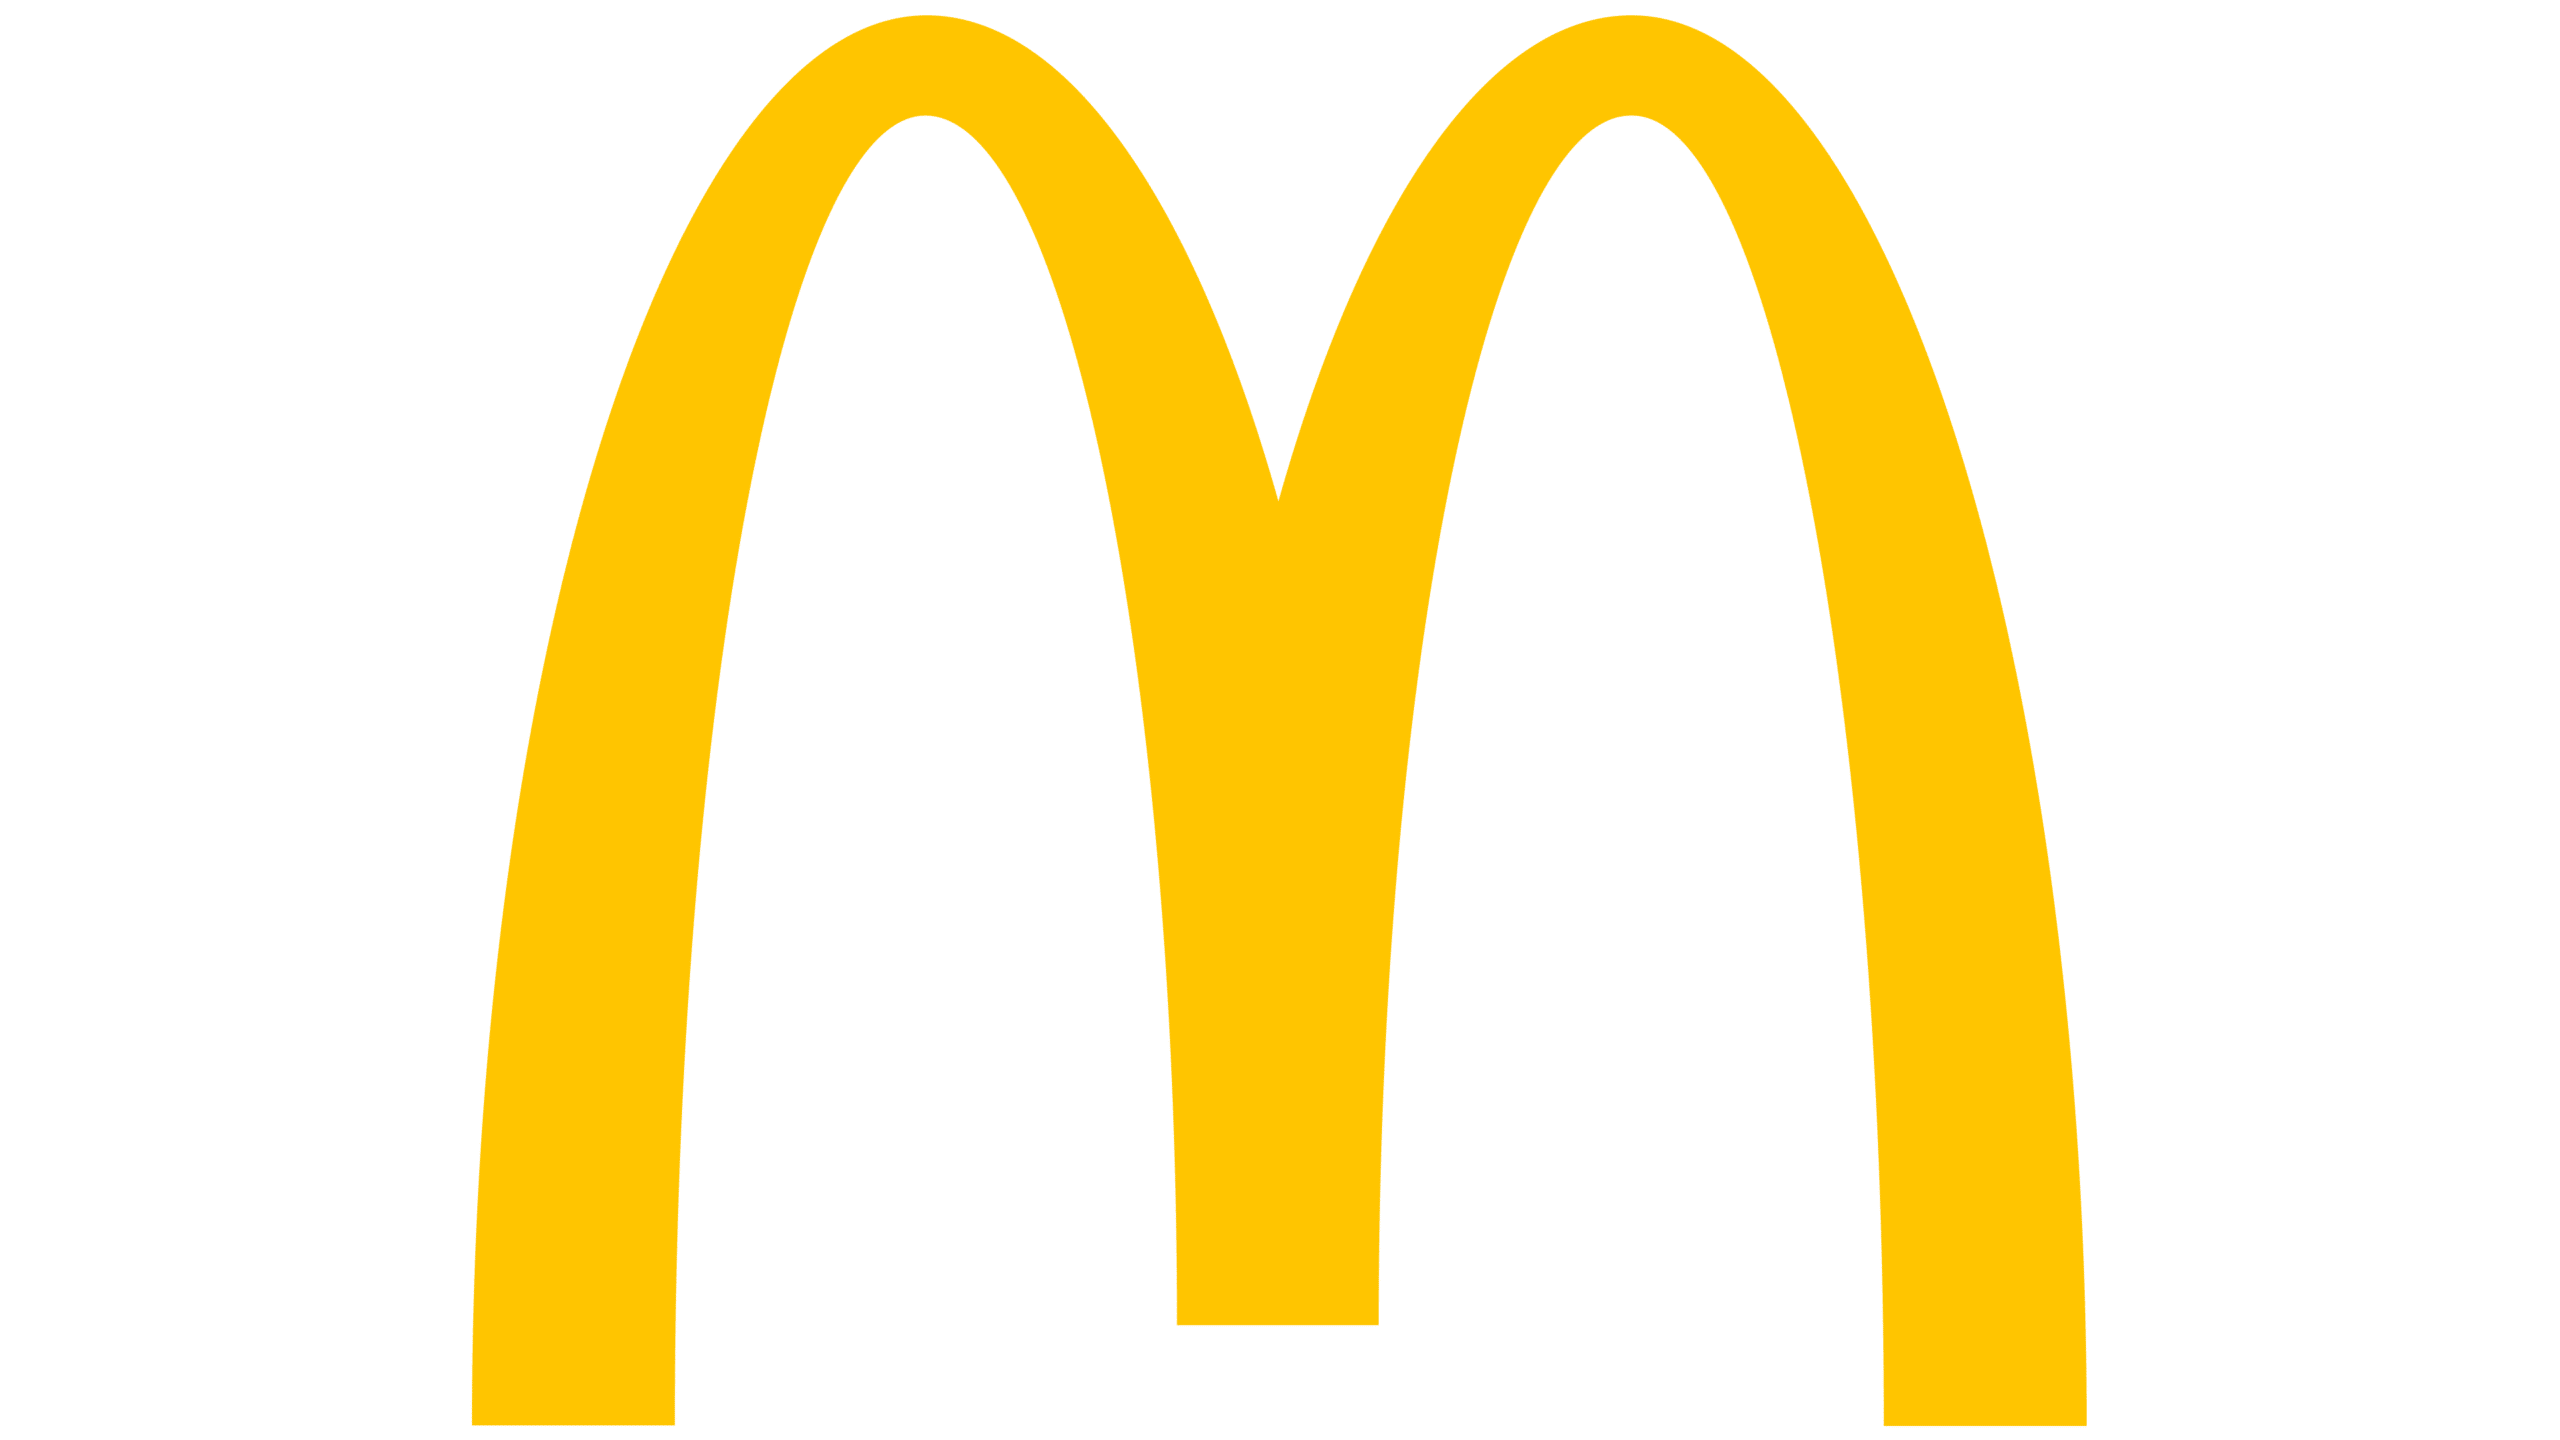 McDonald's Iconic Logo - The Golden Arches of Worldwide Familiarity A Global Symbol of Recognition